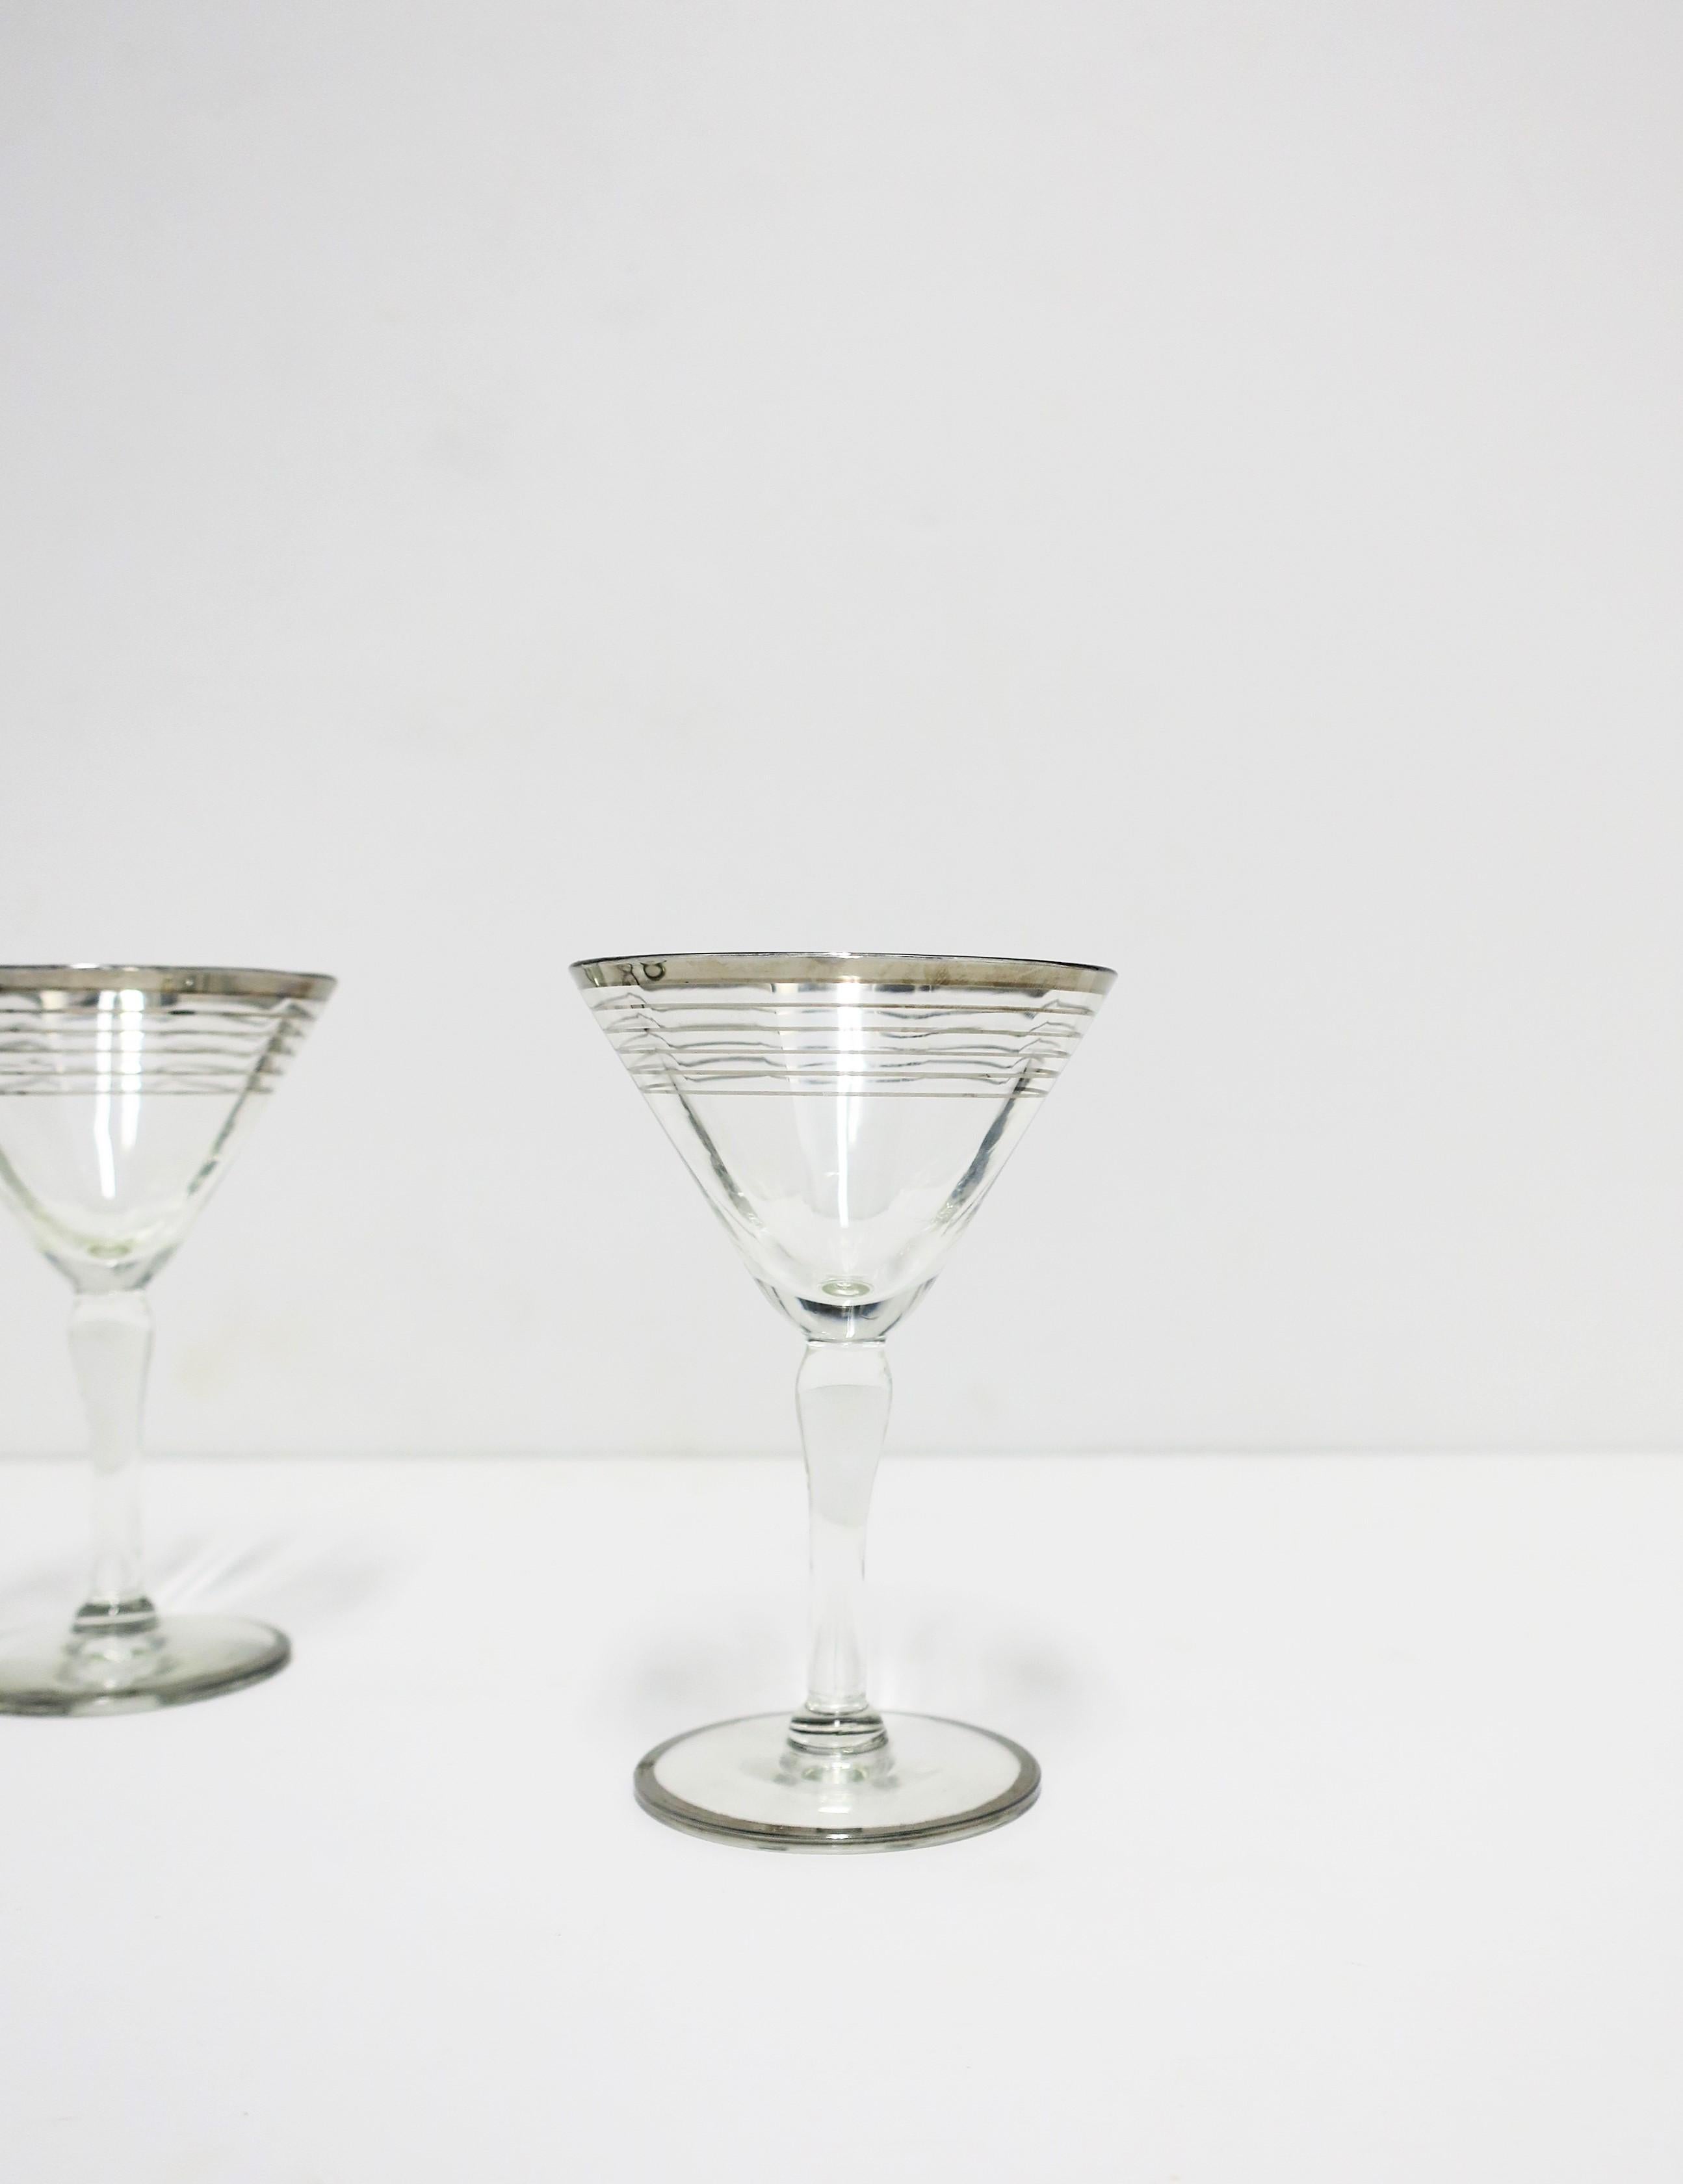 20th Century Mid-Century Modern Cocktail or Martini Glasses, Set of 4